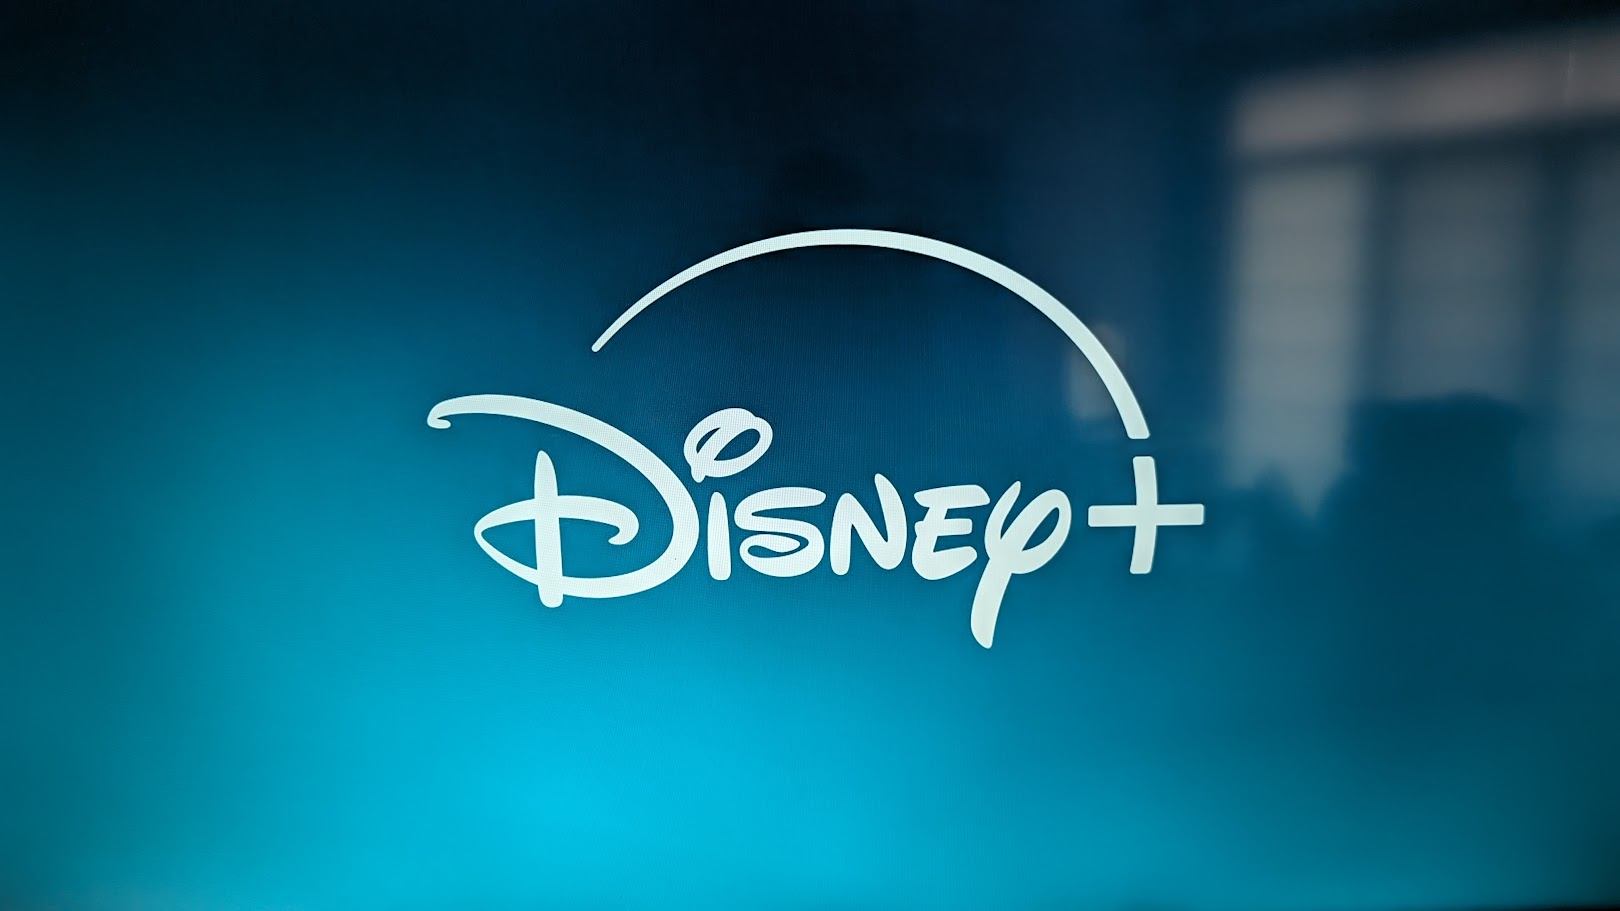 Disney+ Is Expected to Merge With Hulu This Week, Ending Several Months of Beta Testing